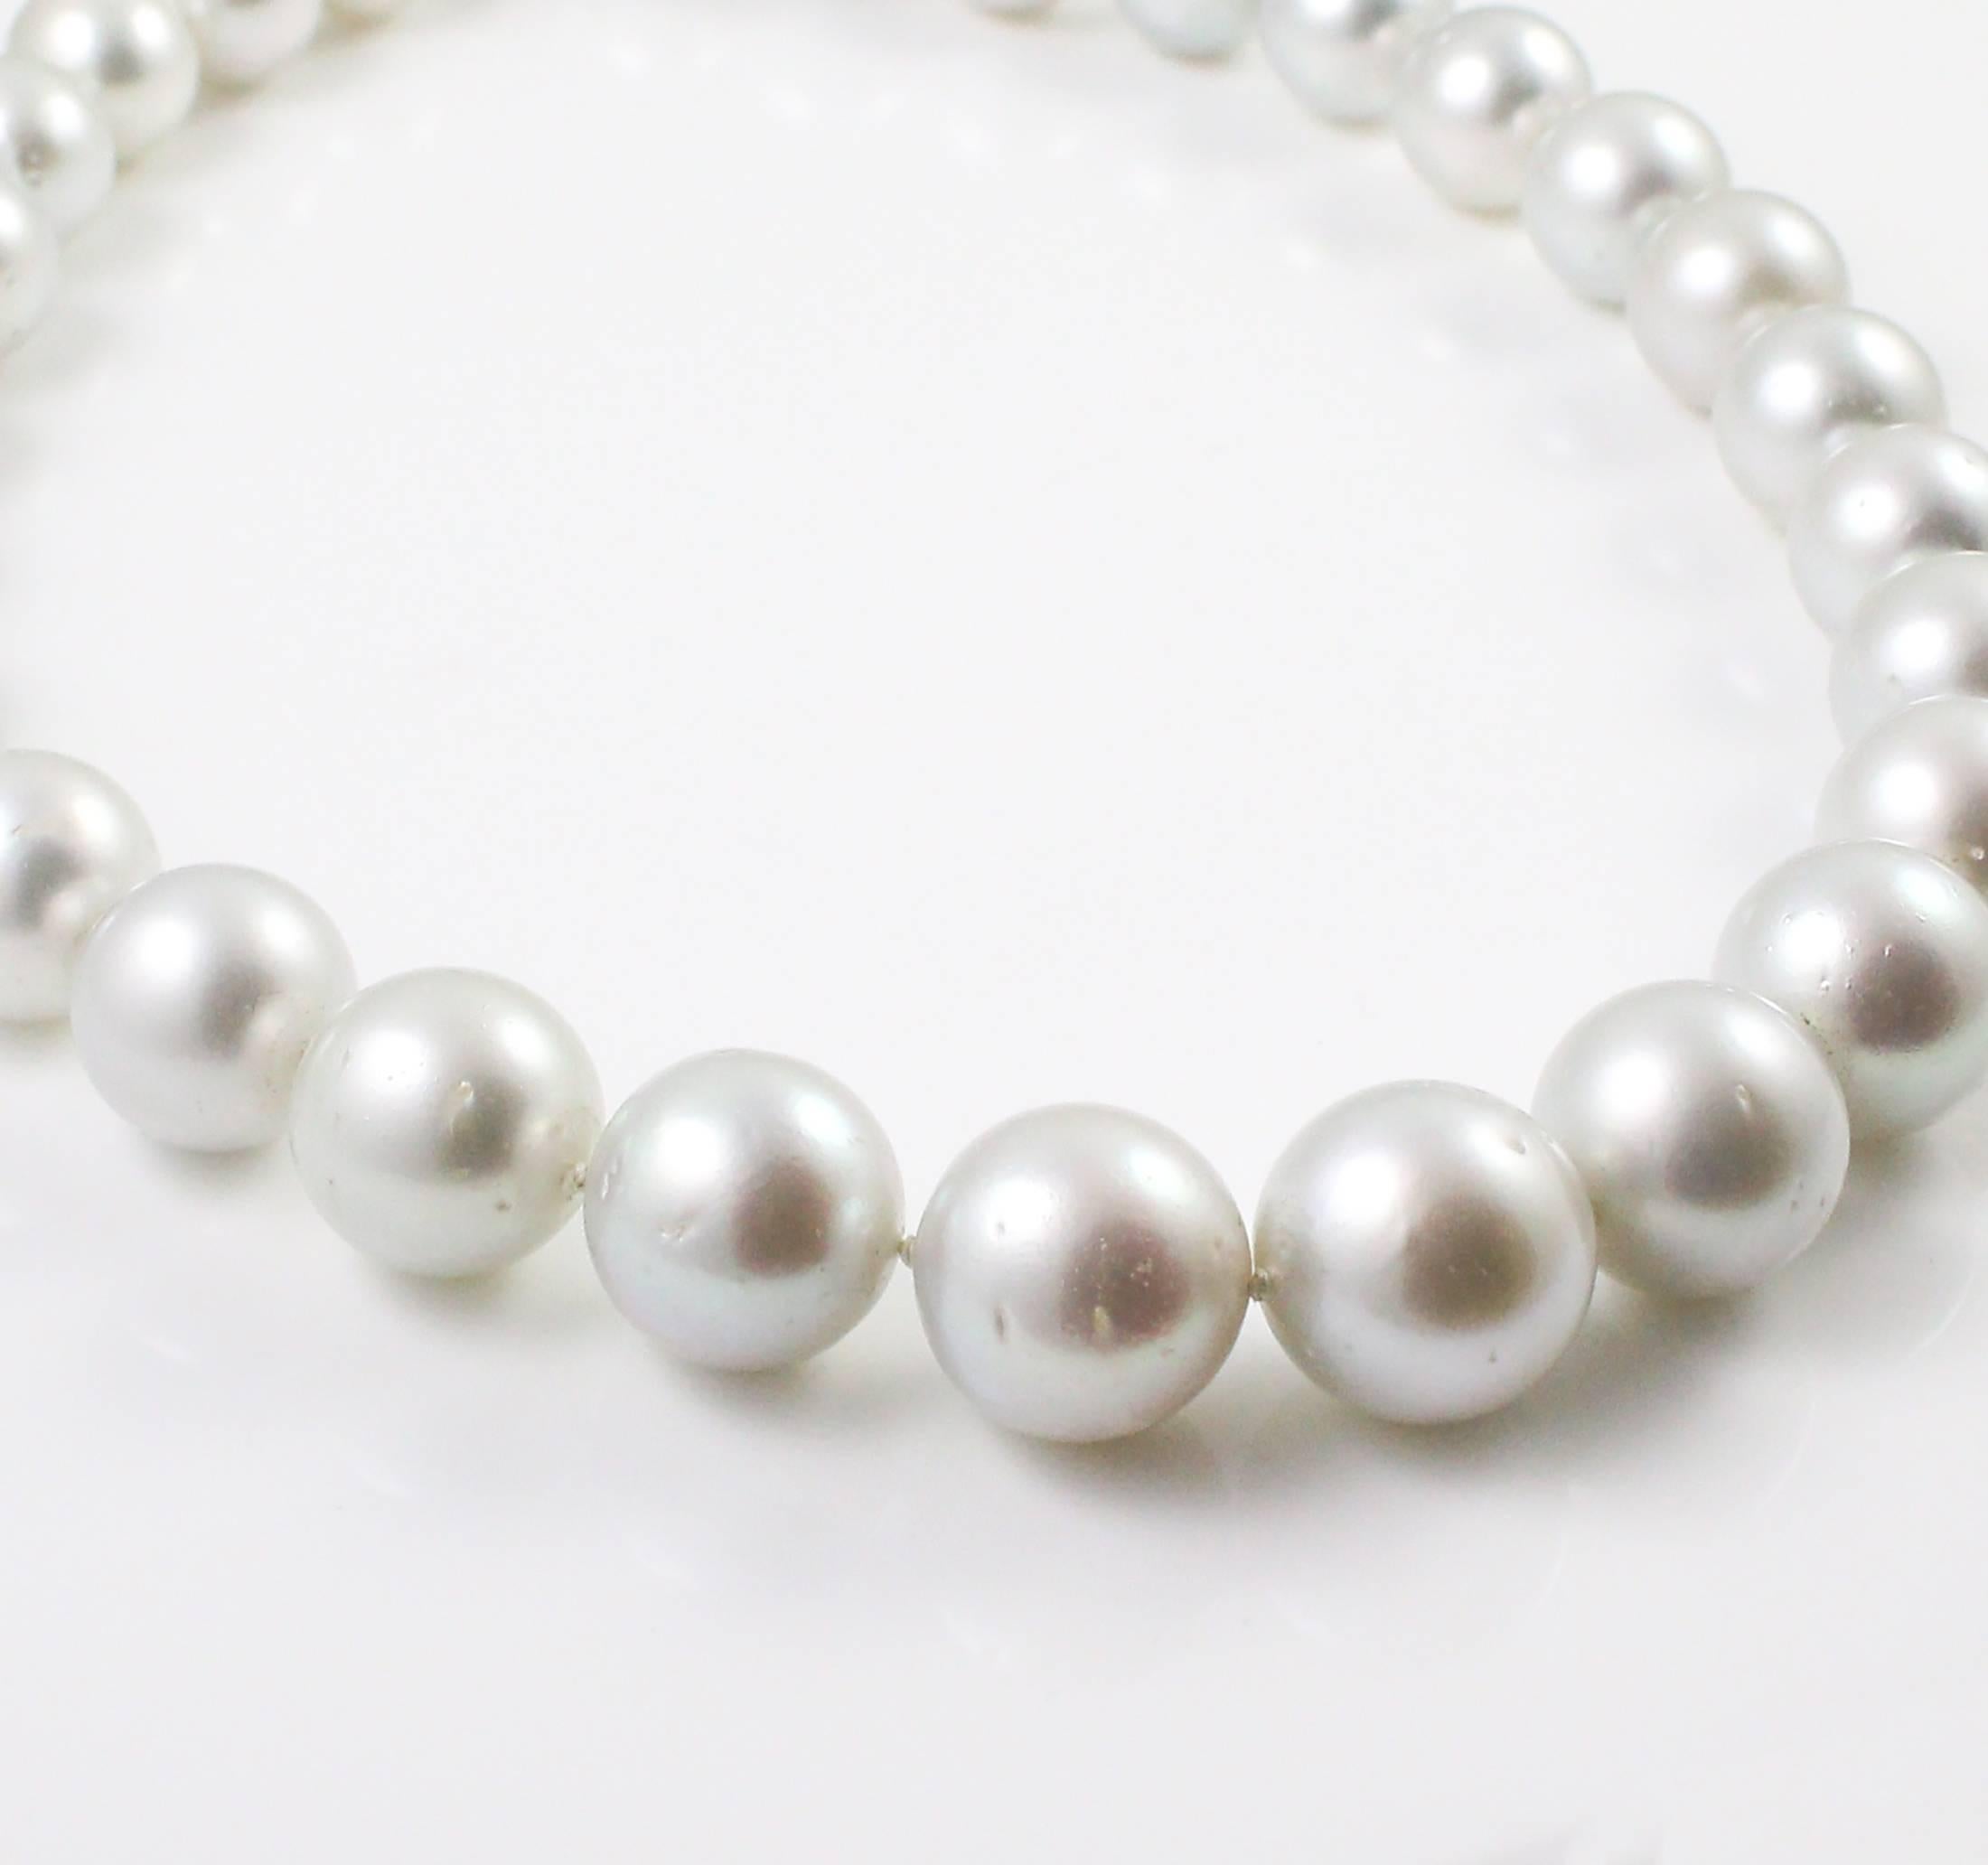 This pearl necklace features 29 graduating South Sea pearls, with the largest measuring 18mm, the smallest measuring 13.4mm and the majority measuring 15mm. The pearls have great sheen/luster with minor blemishes and are perfectly matched in terms